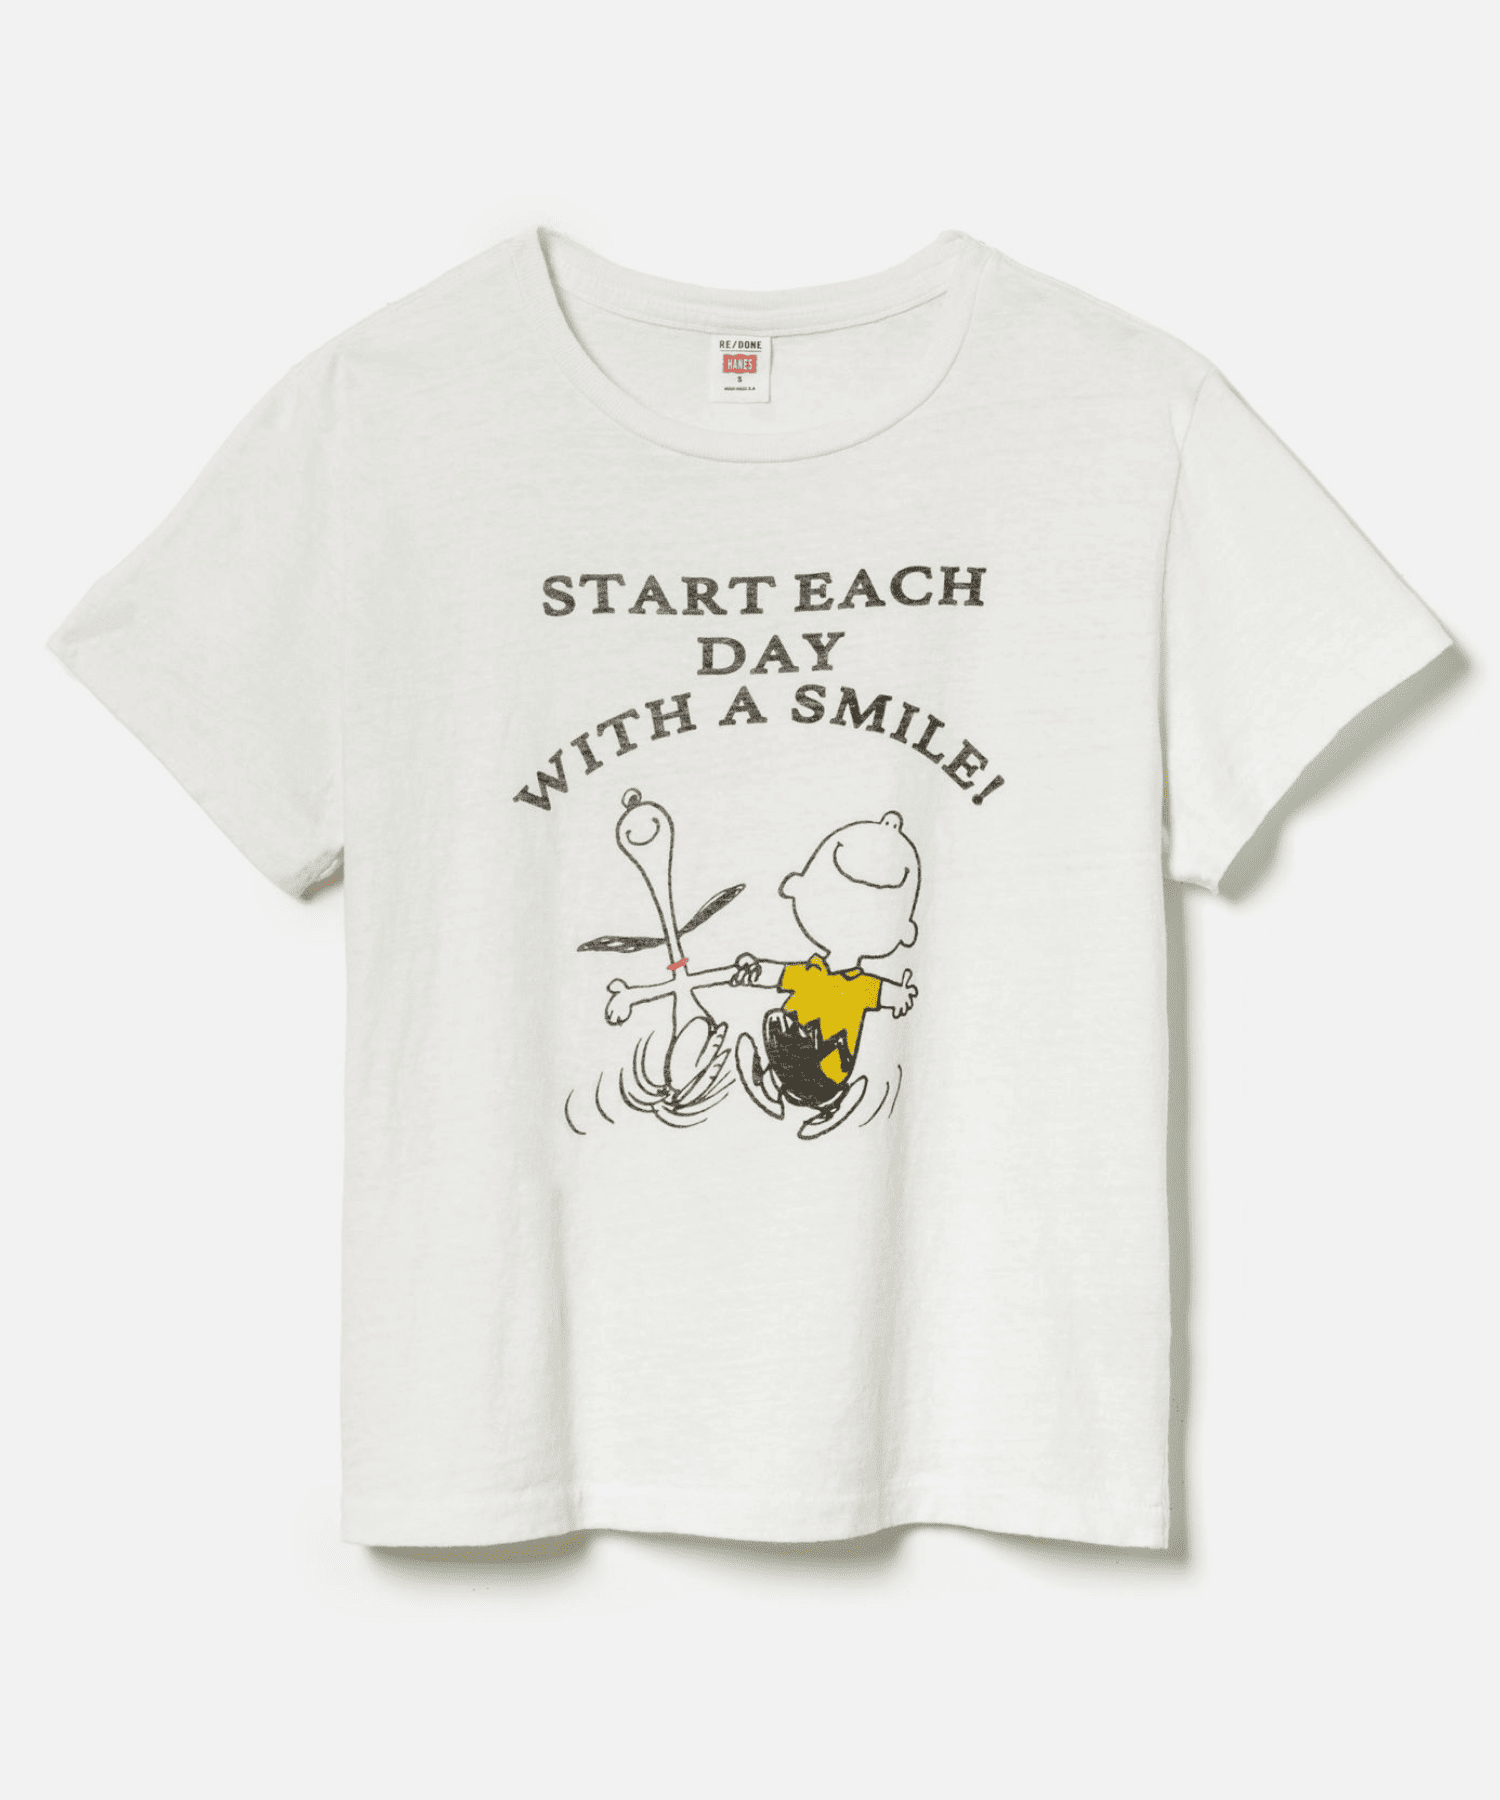 ReDone Vintage White With A Smile Tee